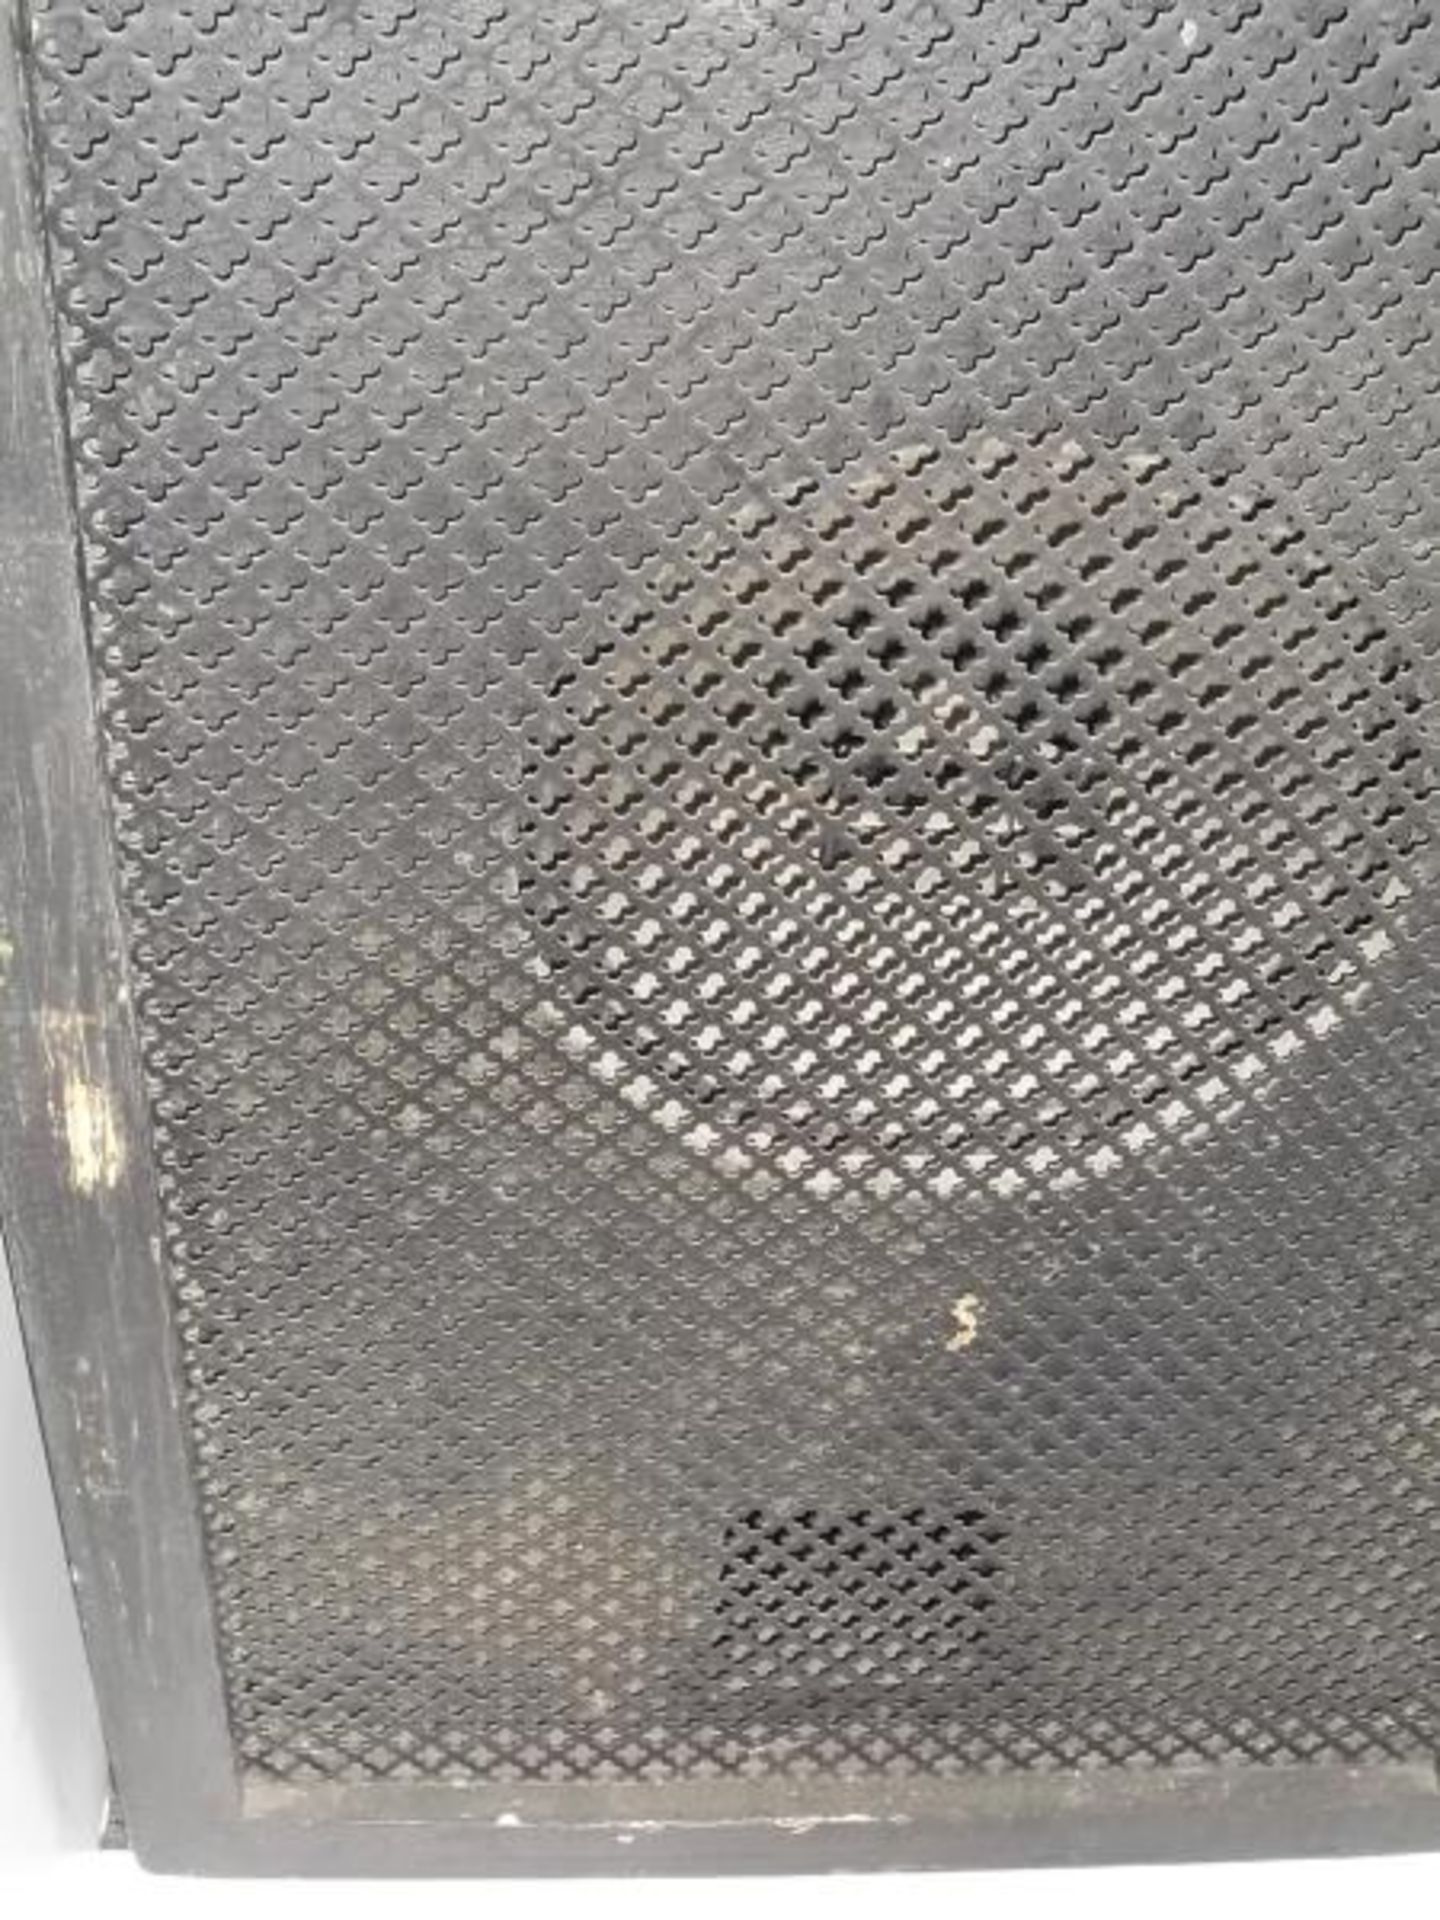 Pair of Altec speaker cabinets, painted black with one speaker in each, some damage to screens and - Image 10 of 12